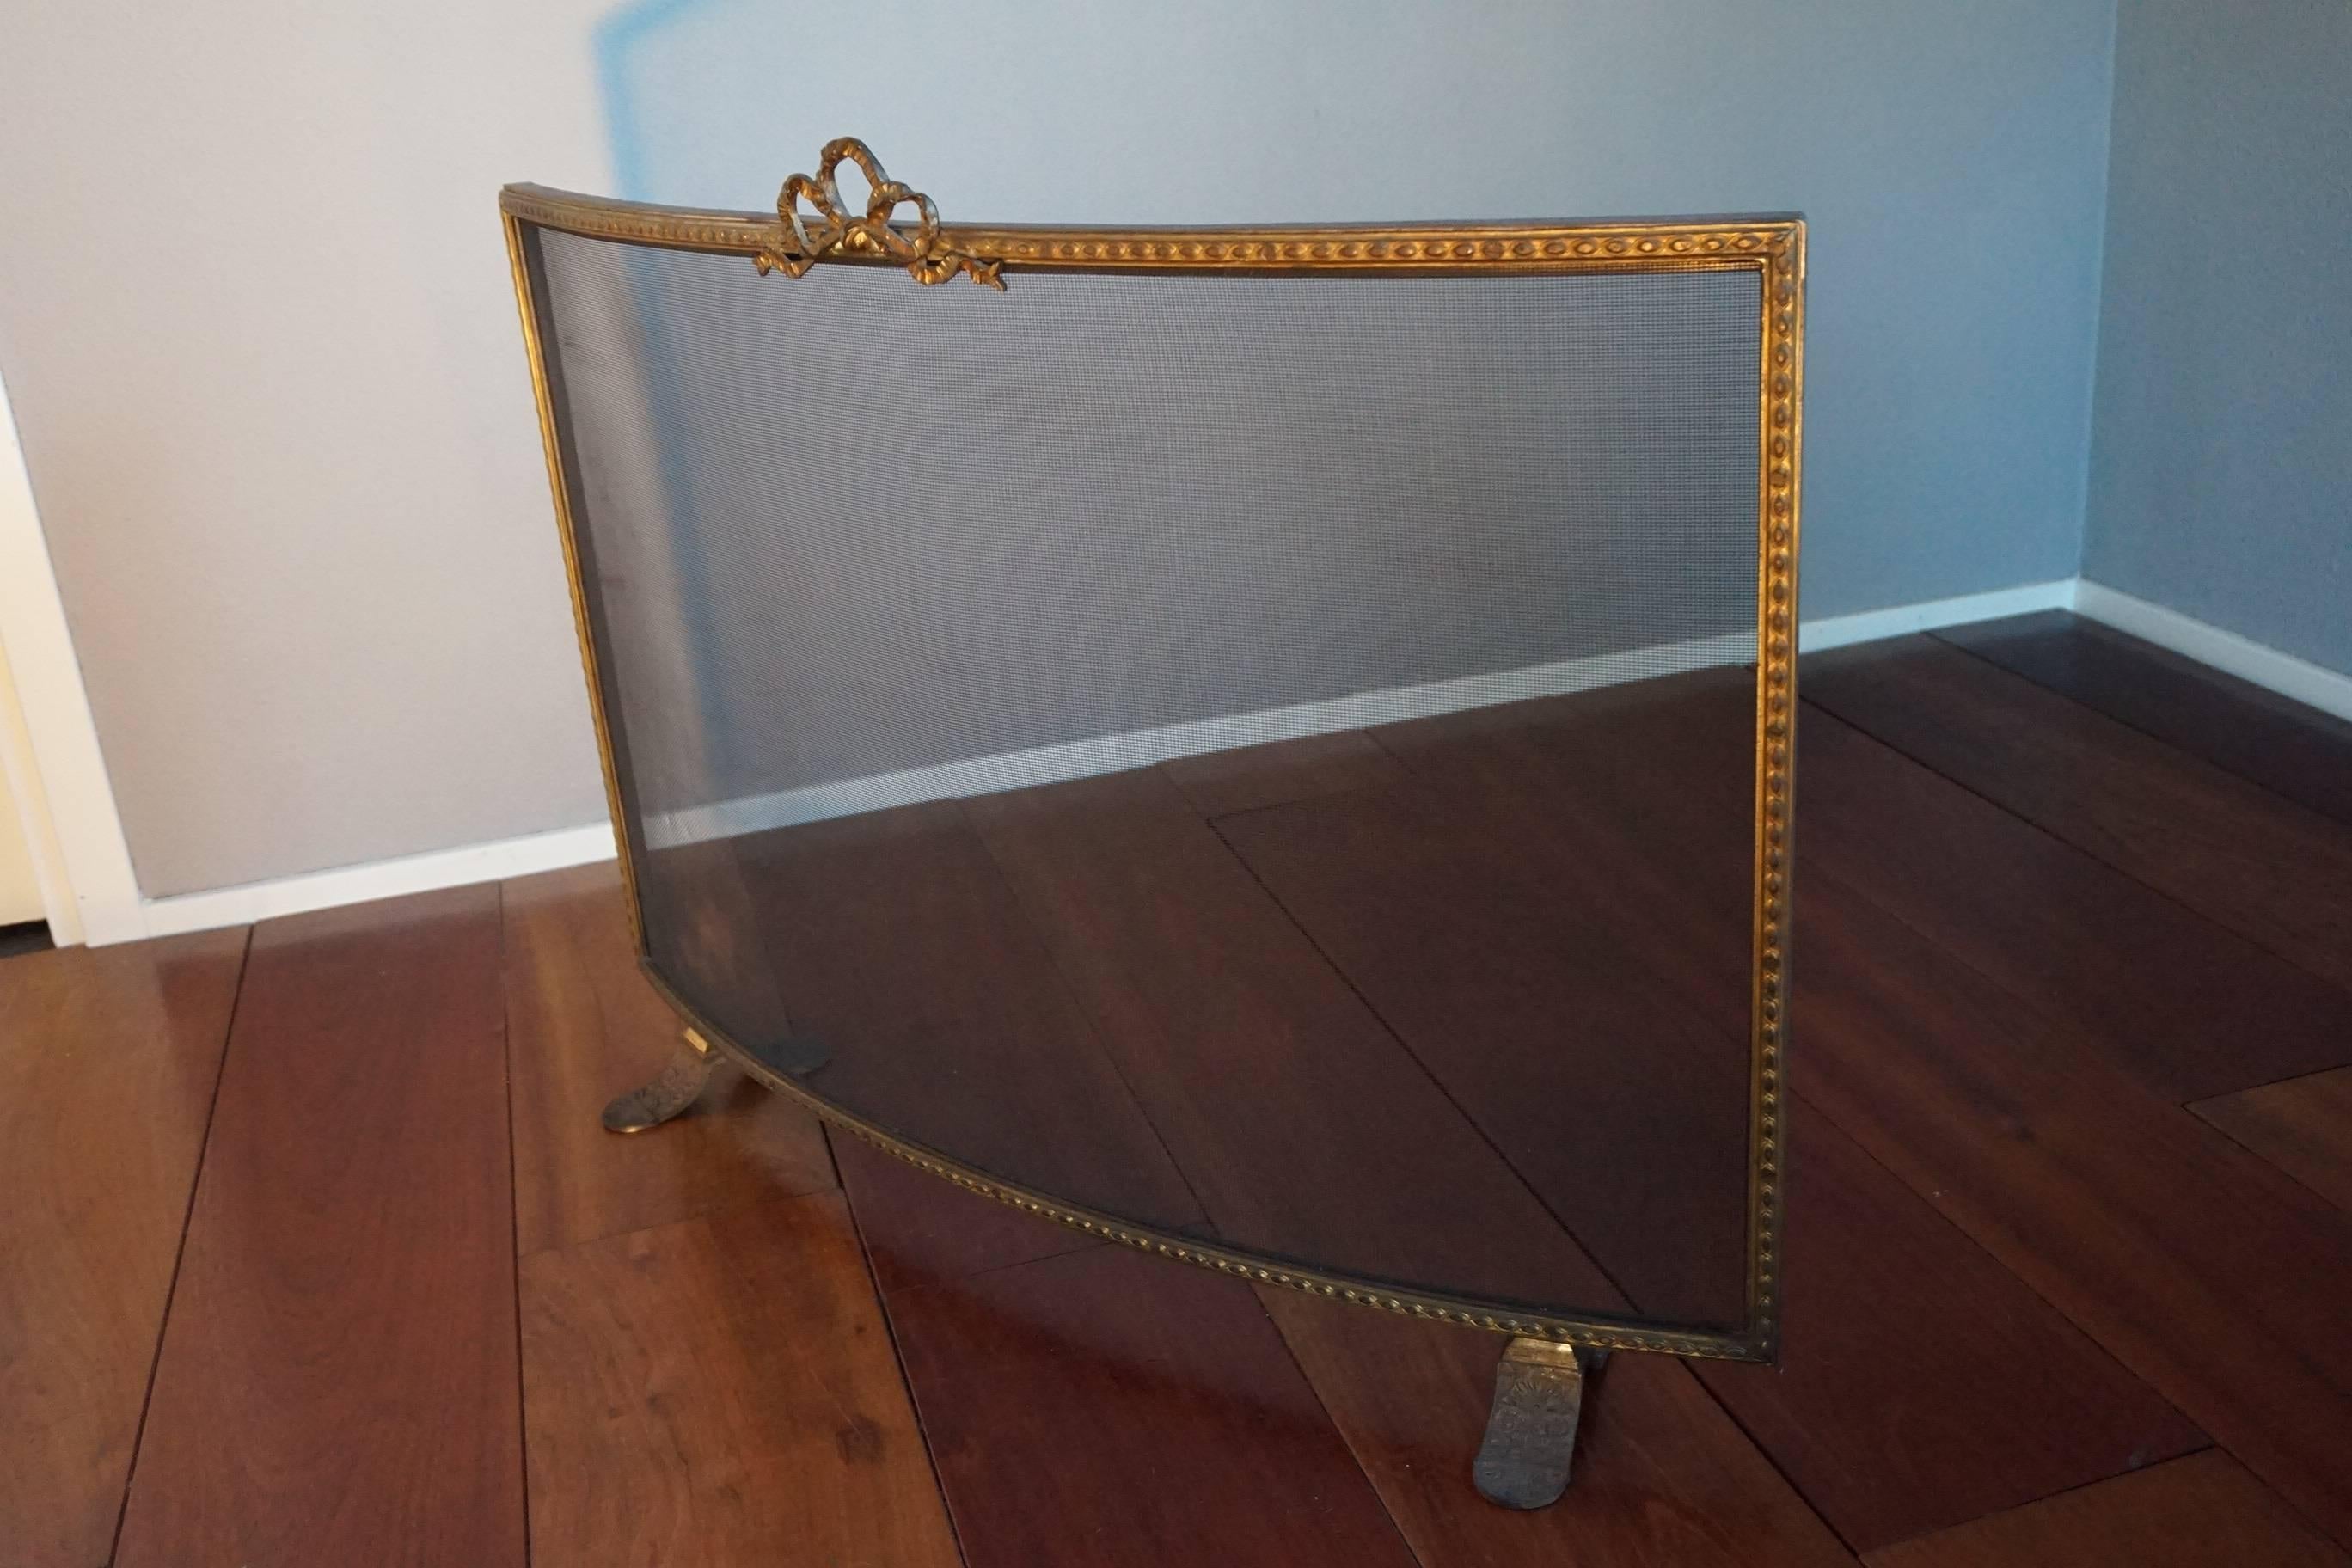 French Antique 19th Century Gilt Bronze and Wrought Iron Firescreen with Mint Wire Mesh